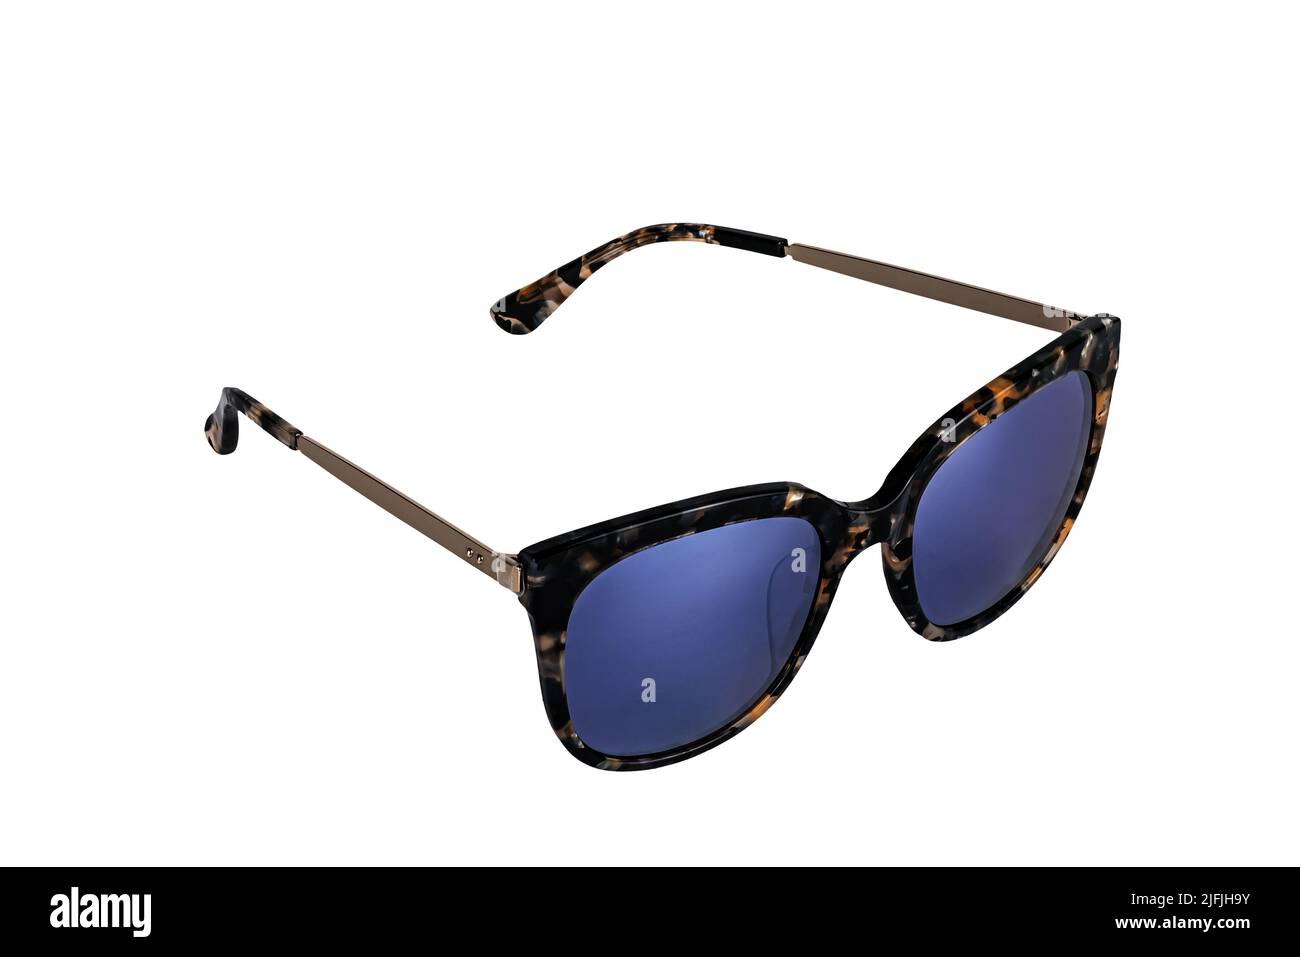 Closeup view of stylish dark blue sunglasses isolated on white background with clipping path. Stock Photo